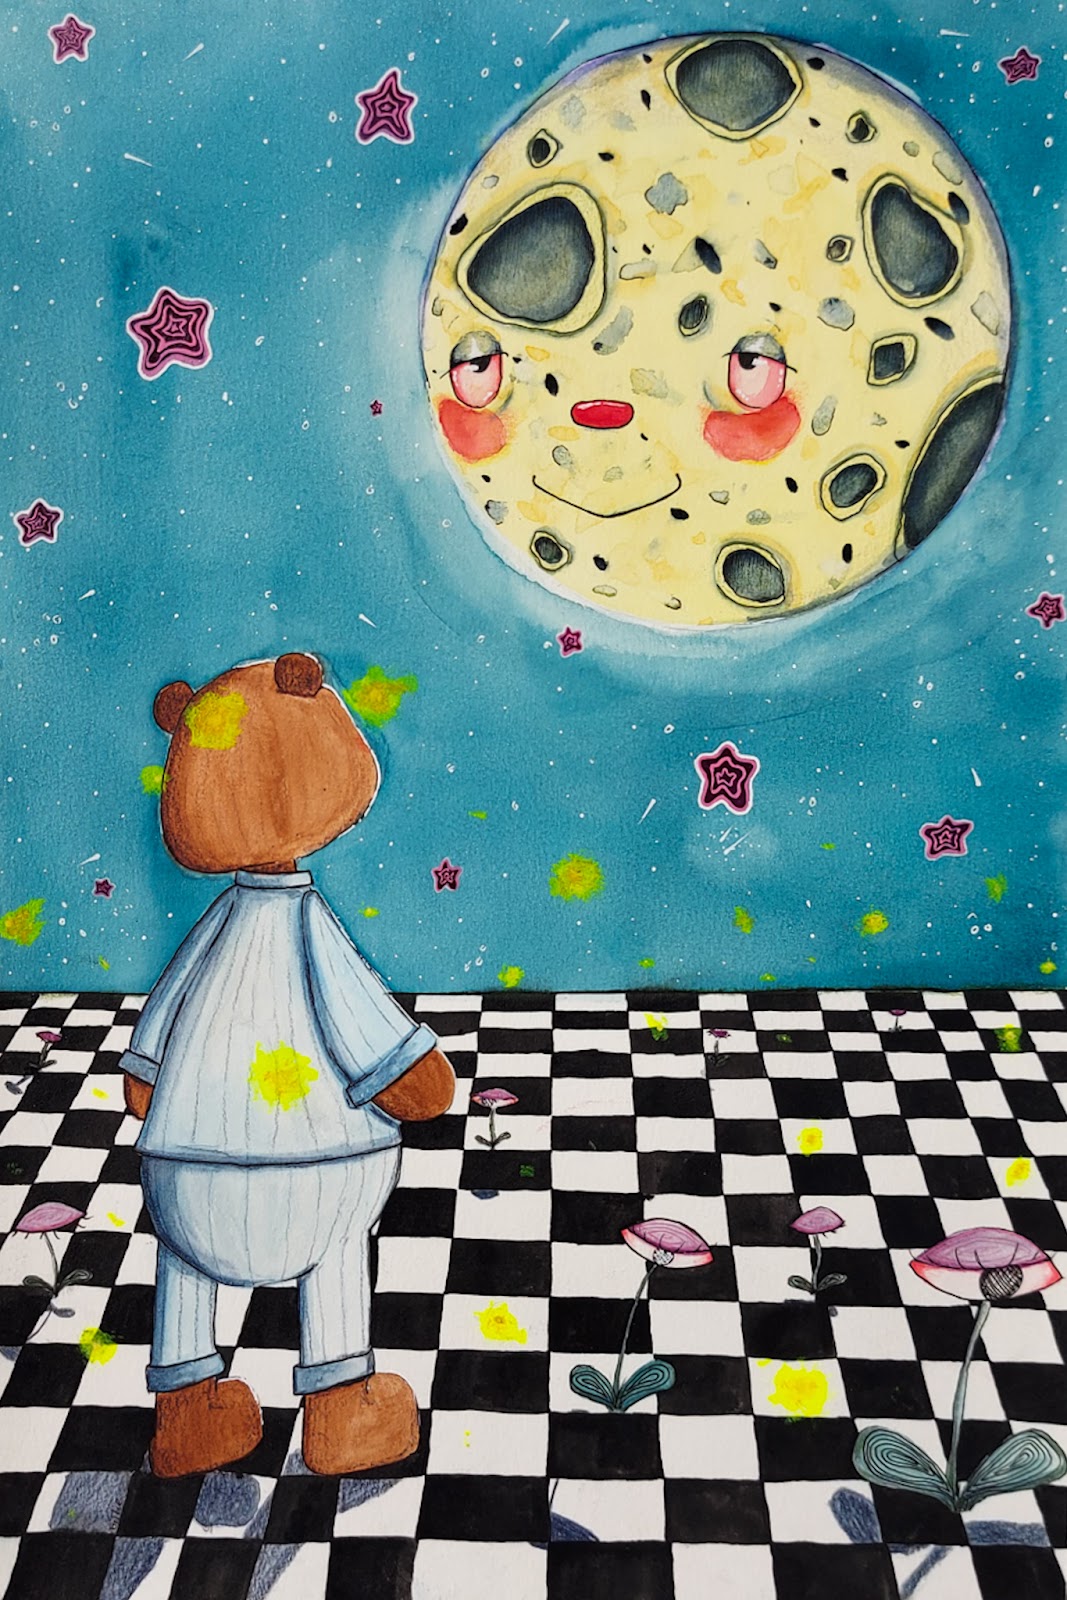 A bear in pjs gazes up at the moon who smiles back.  A starry sky surrounds the moon and the ground is a checkerboard design with flowers